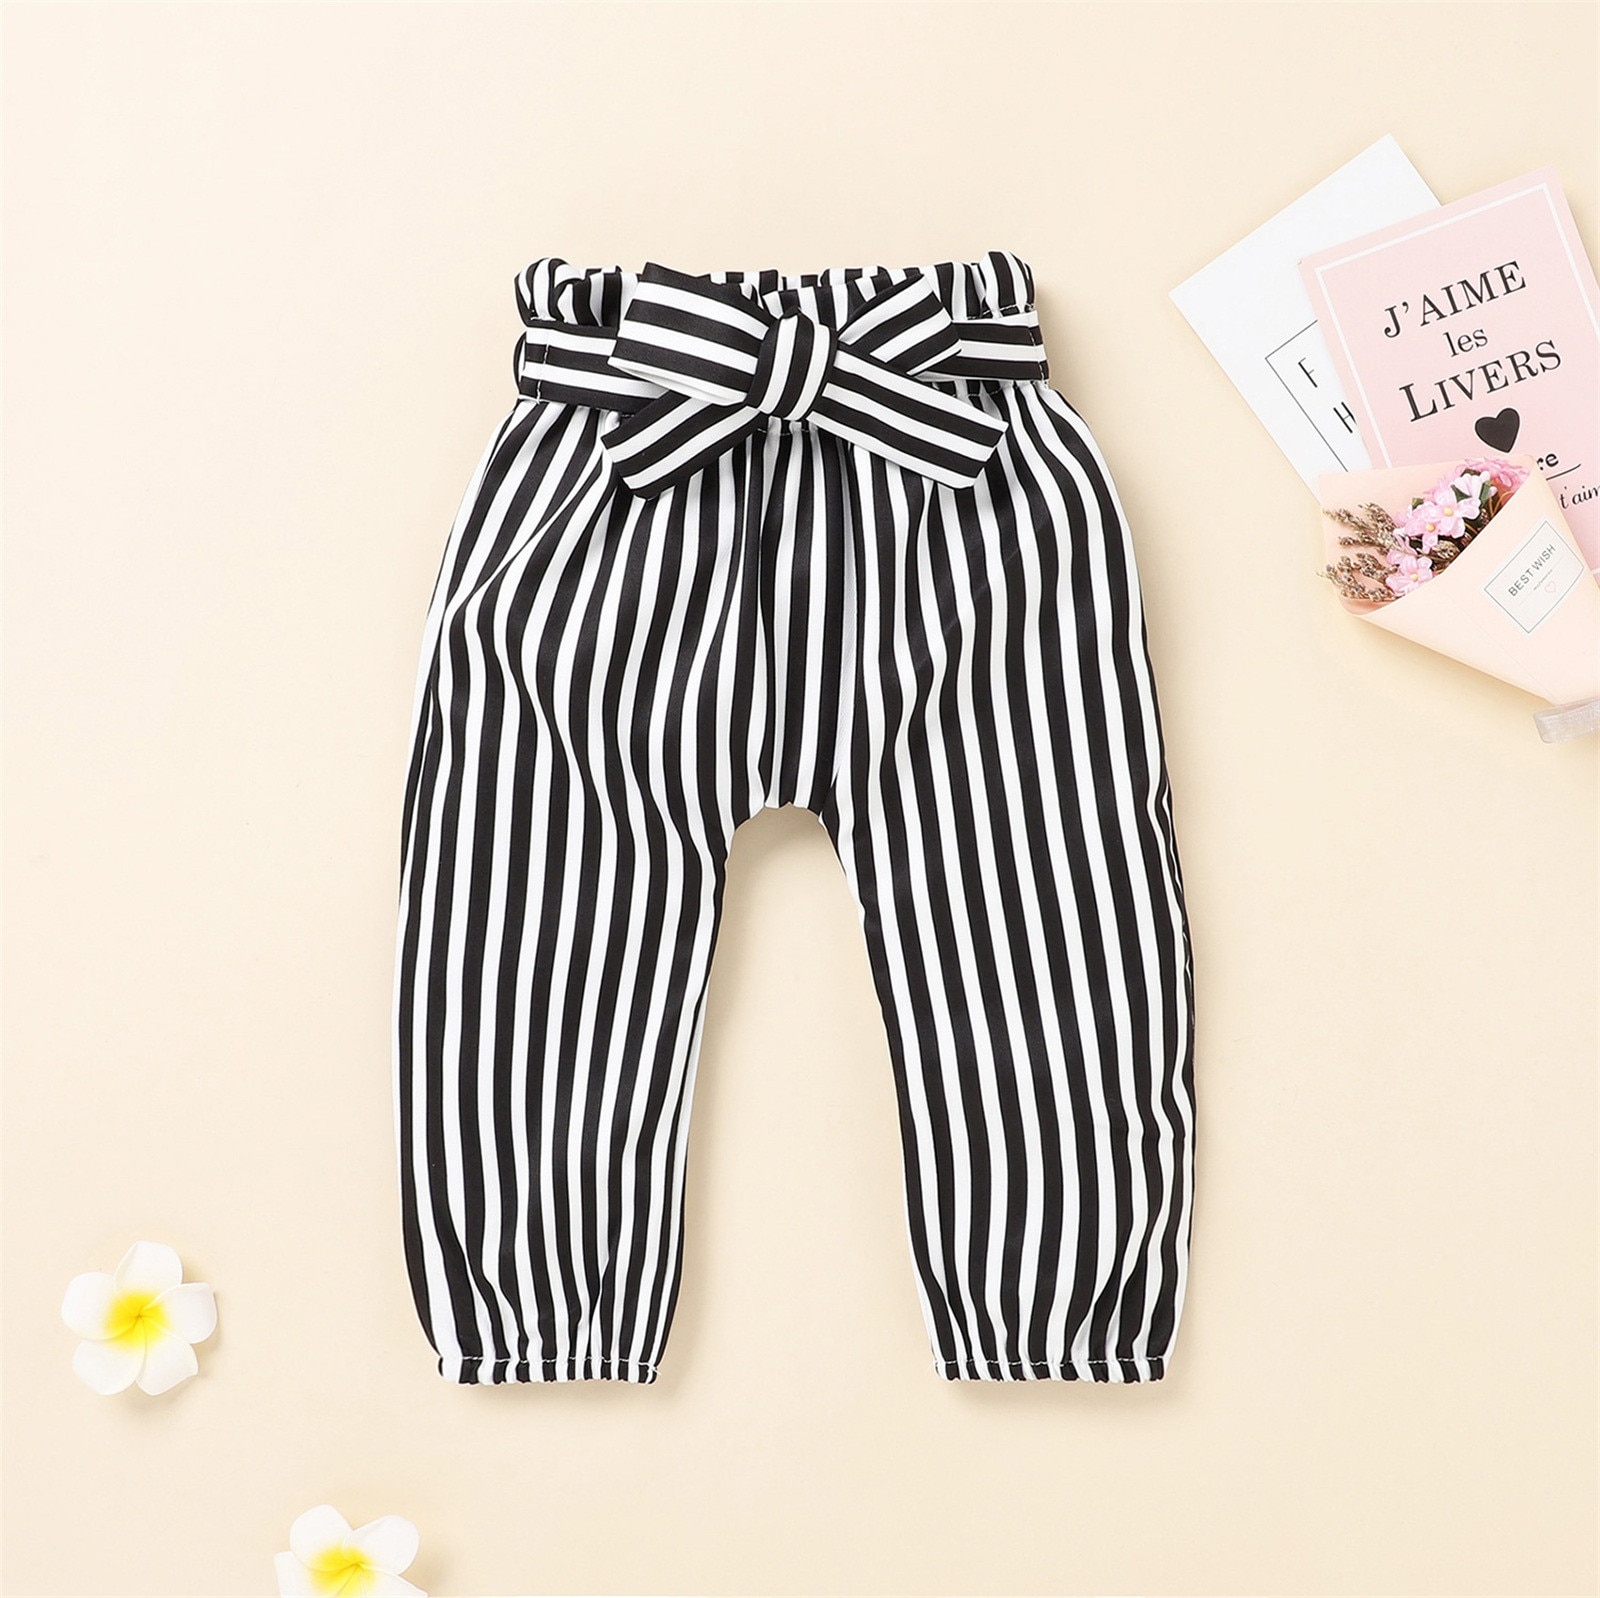 3pcs-Newborn-Baby-Girls-Clothes-Ribbed-Bodysuit-Striped-Pants-Headband-Sets-Baby-Outfits-Winter-Girl-Clothing-3